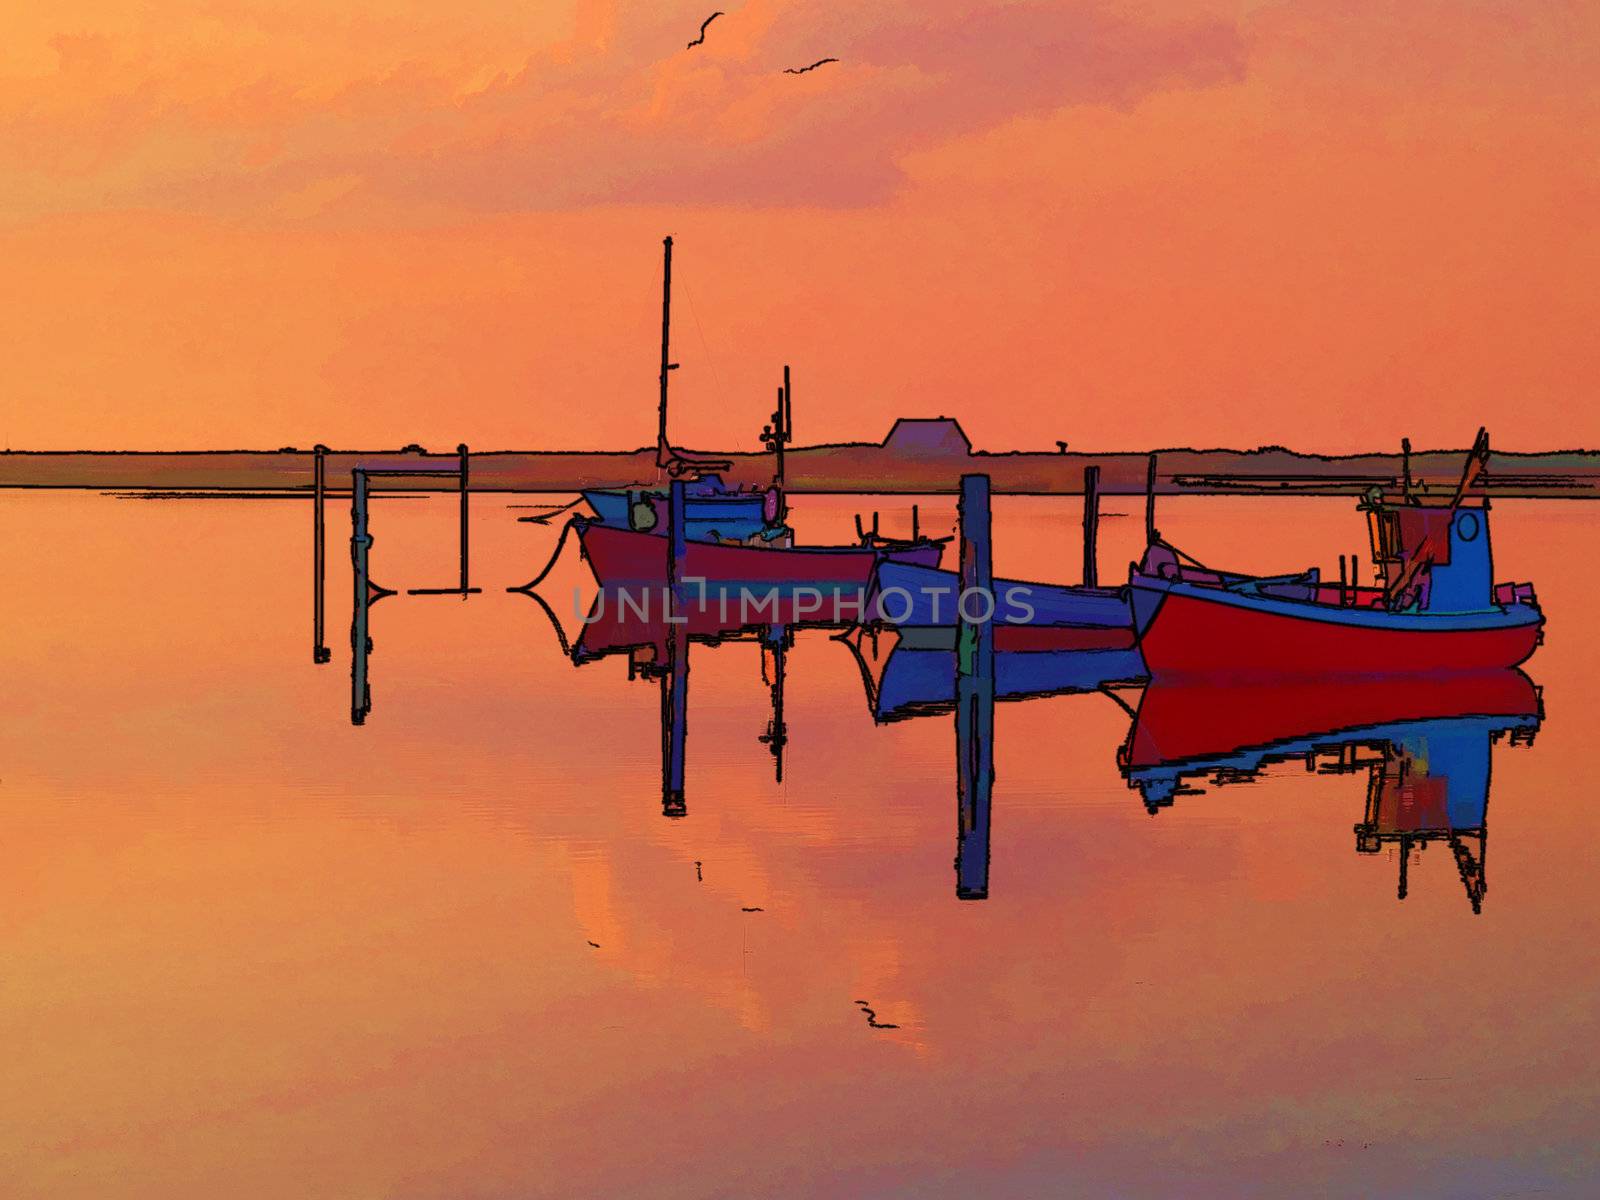 Reflection of a small dinghy dory boats in the sunset great sailing boating fishing image digitally altered manipulated